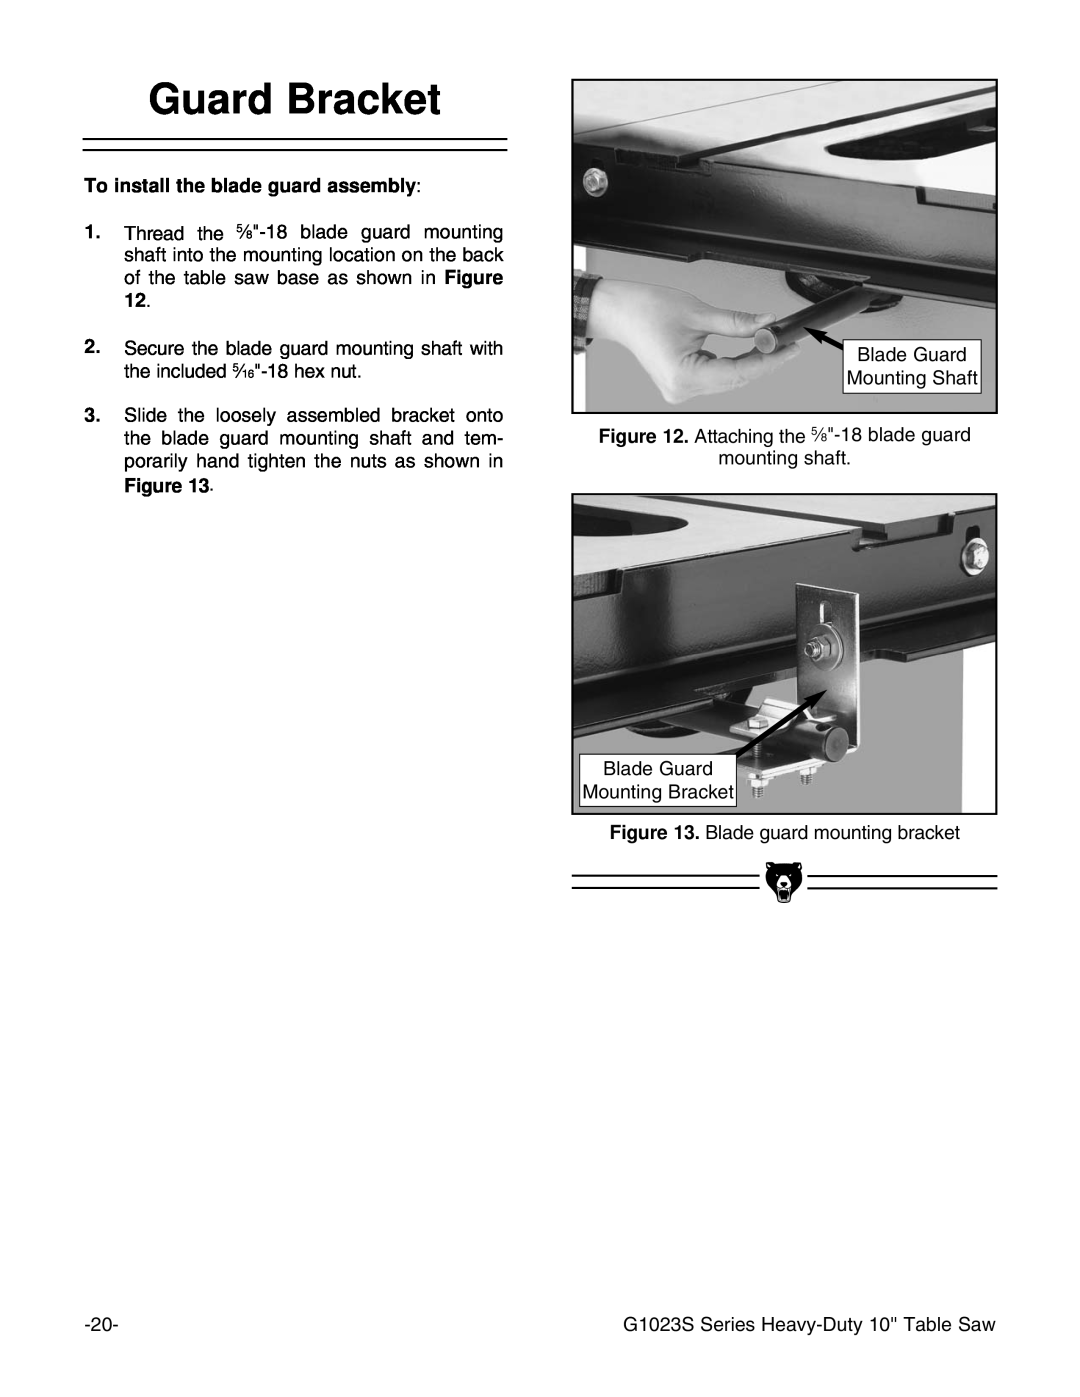 Grizzly MODEL instruction manual Guard Bracket, To install the blade guard assembly 